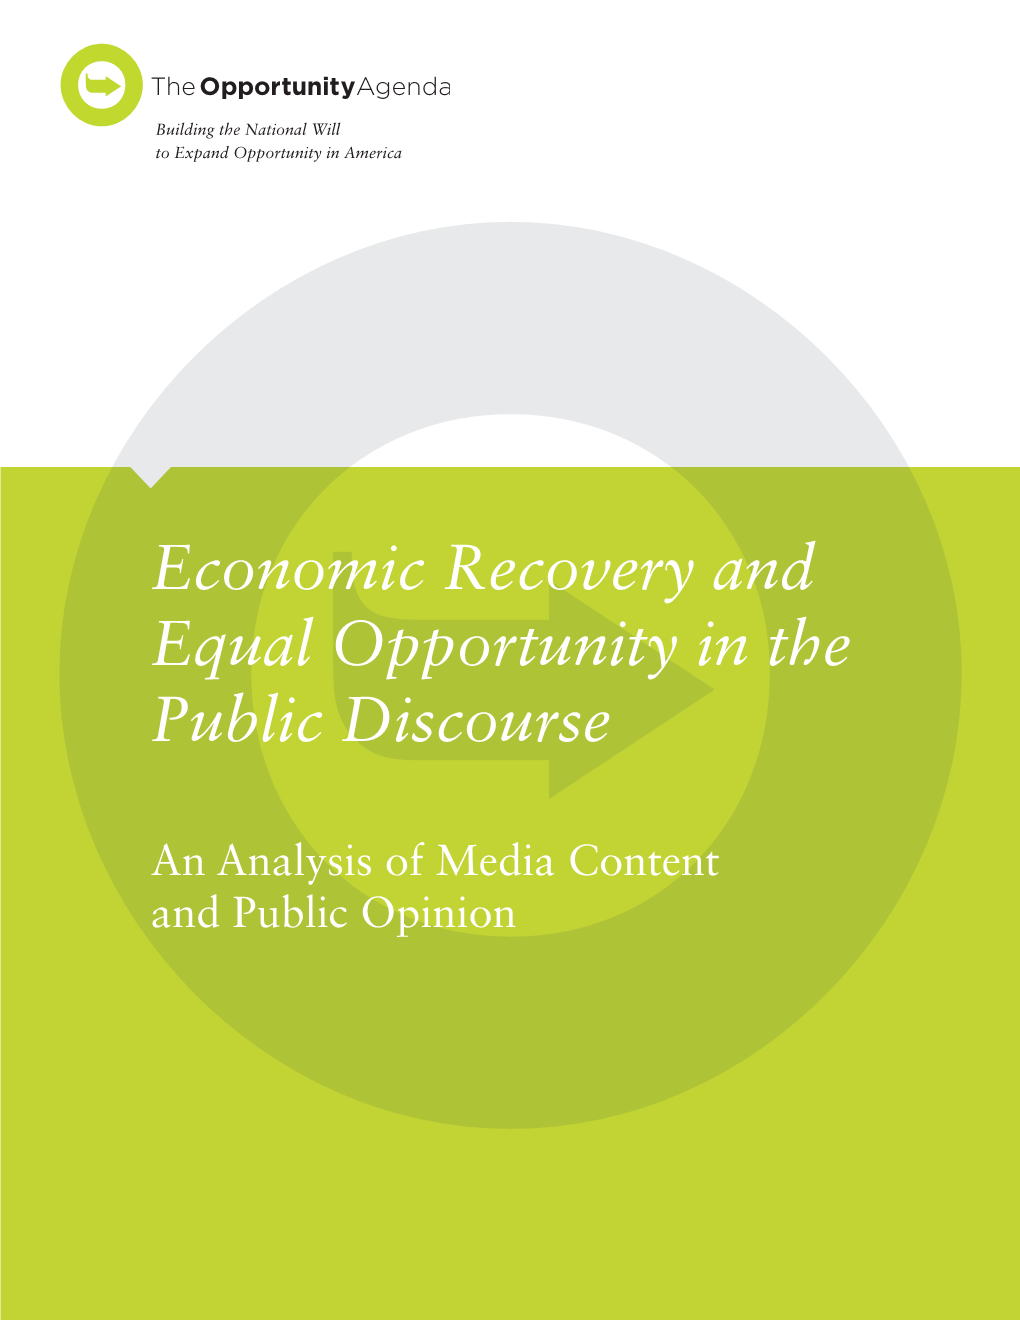 Economic Recovery and Equal Opportunity in the Public Discourse